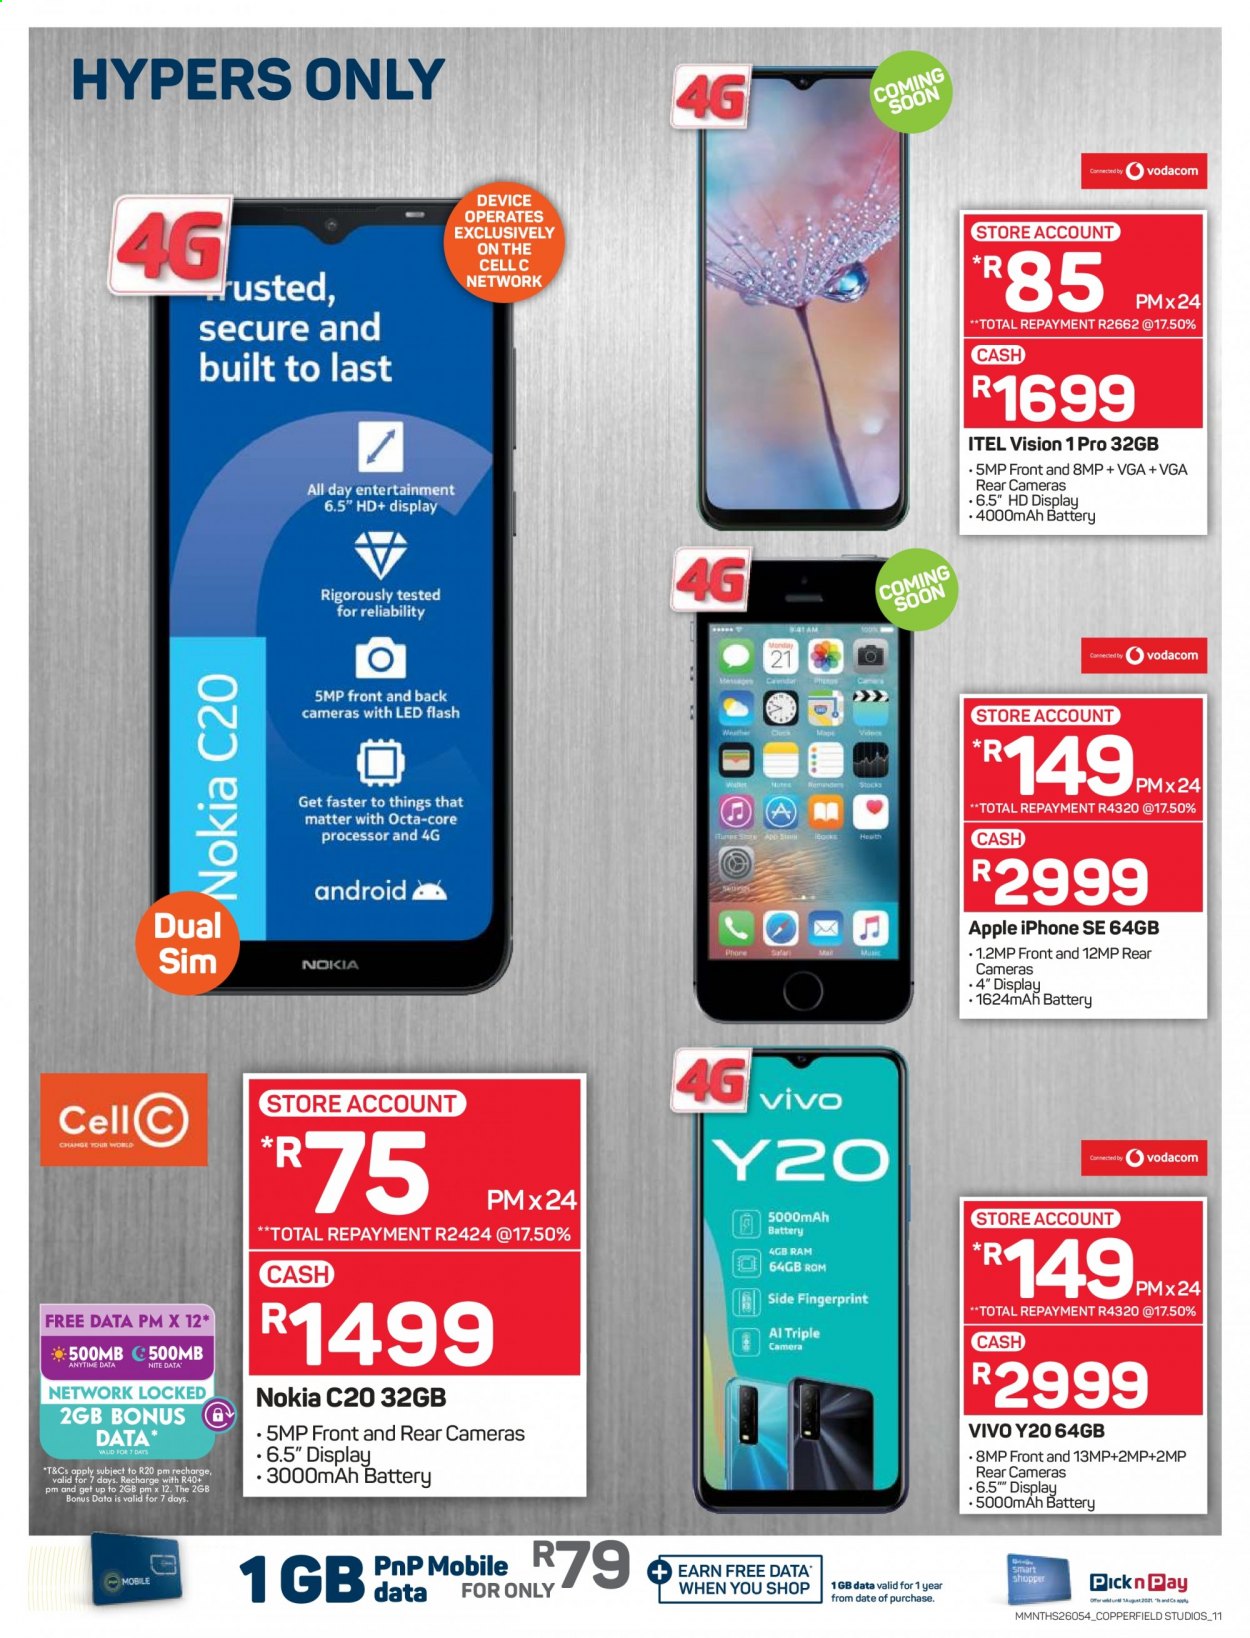 Pick n Pay specials - 07.12.2021 - 09.05.2021. 